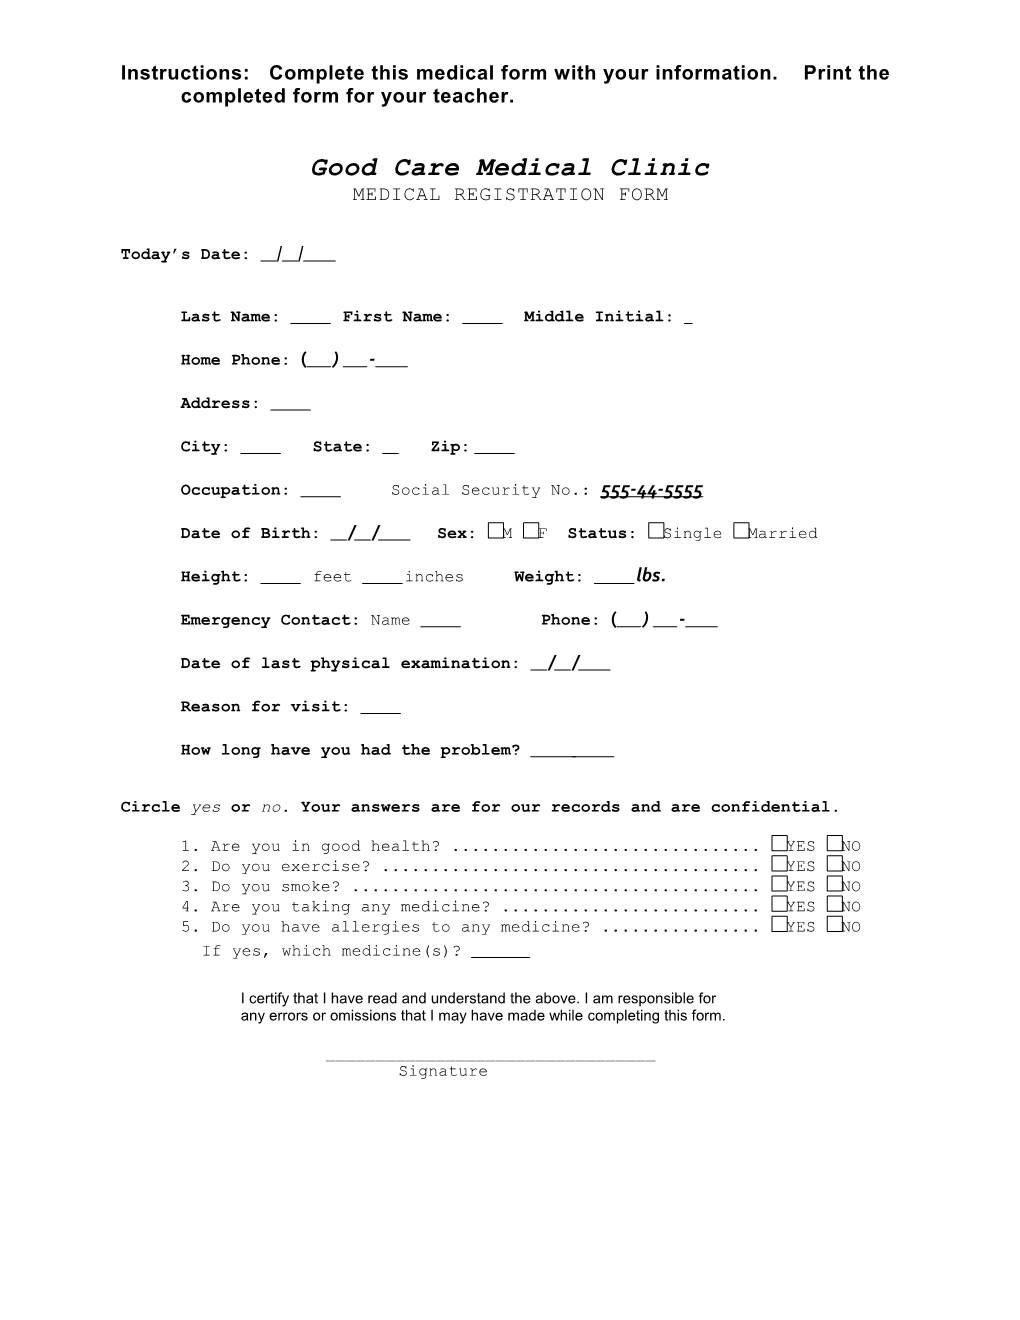 Good Care Medical Clinic